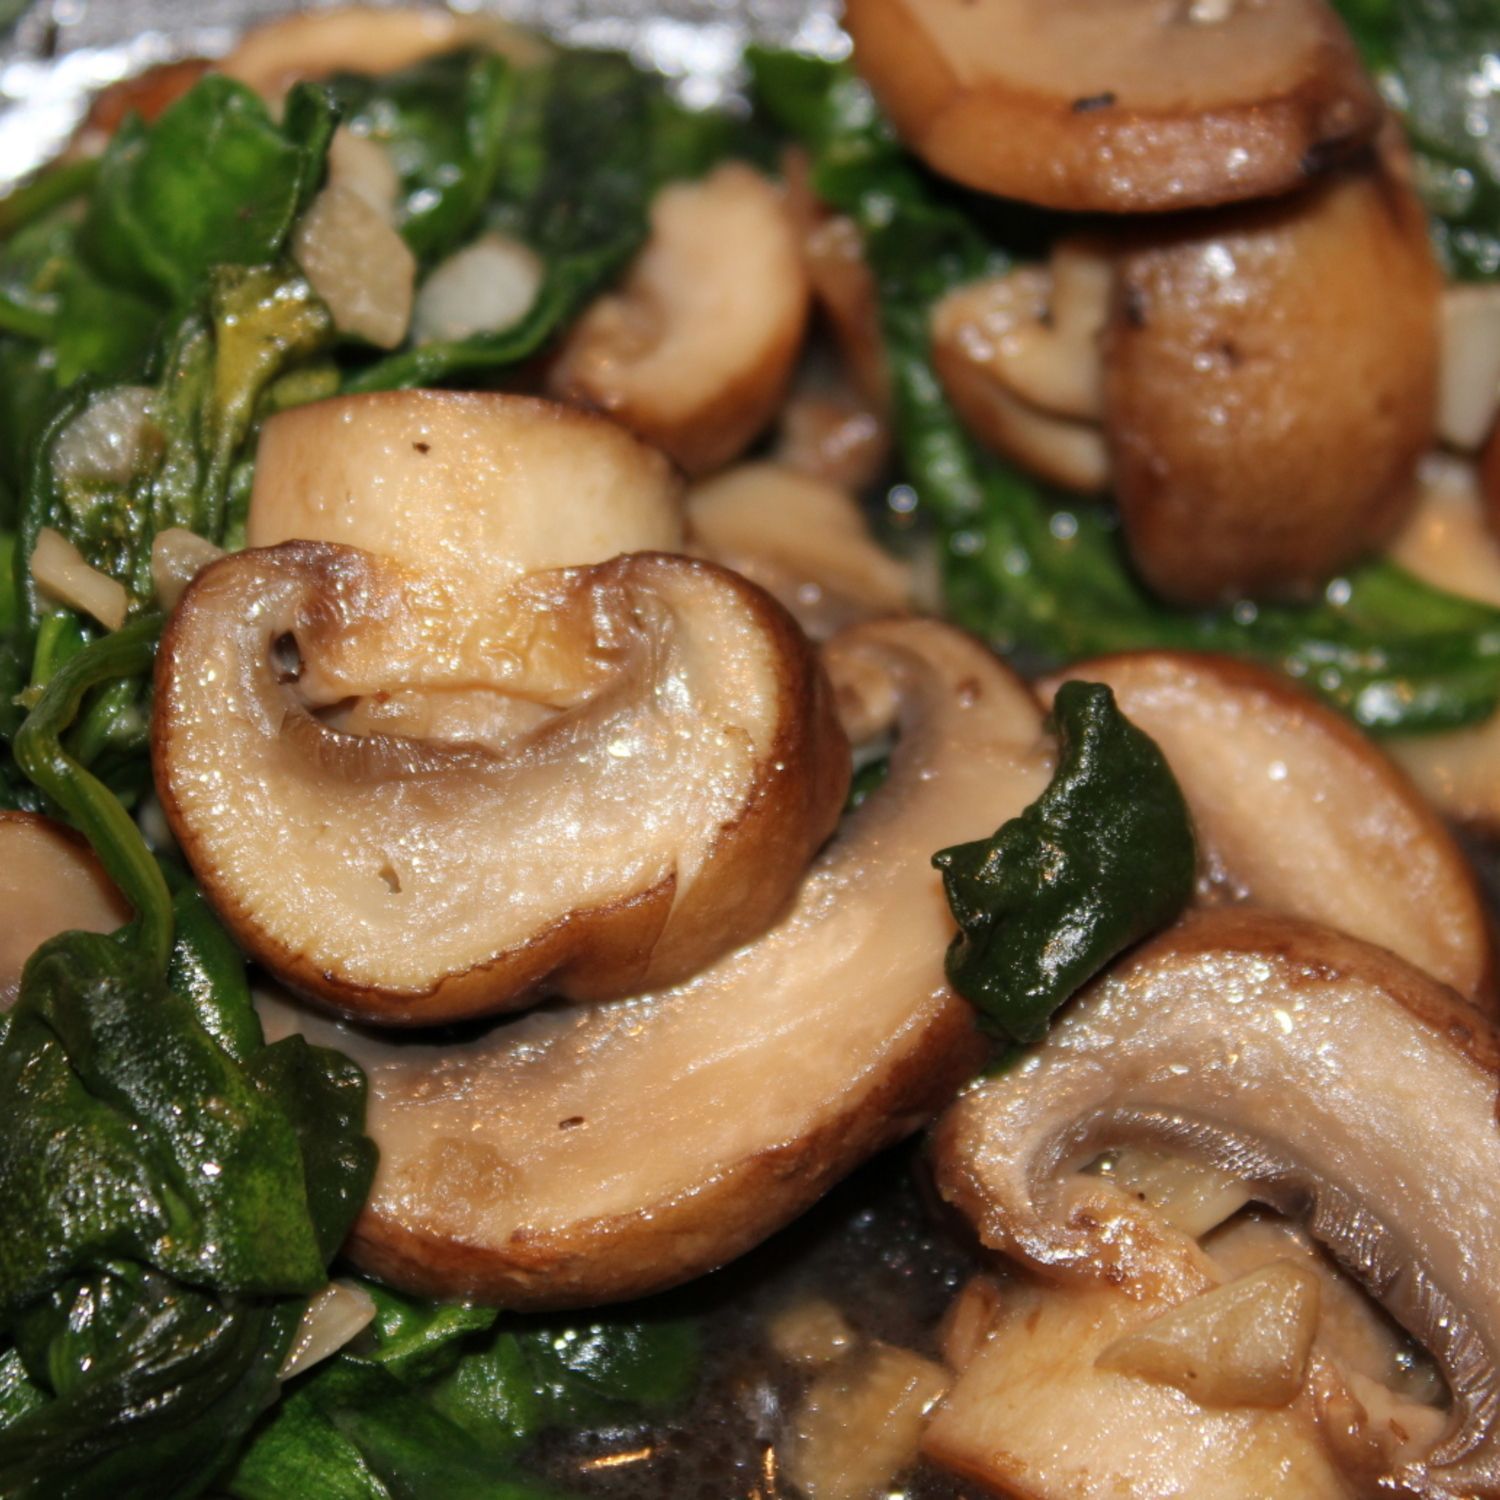 *******Sauteed spinach and mushroom – excellent and easy